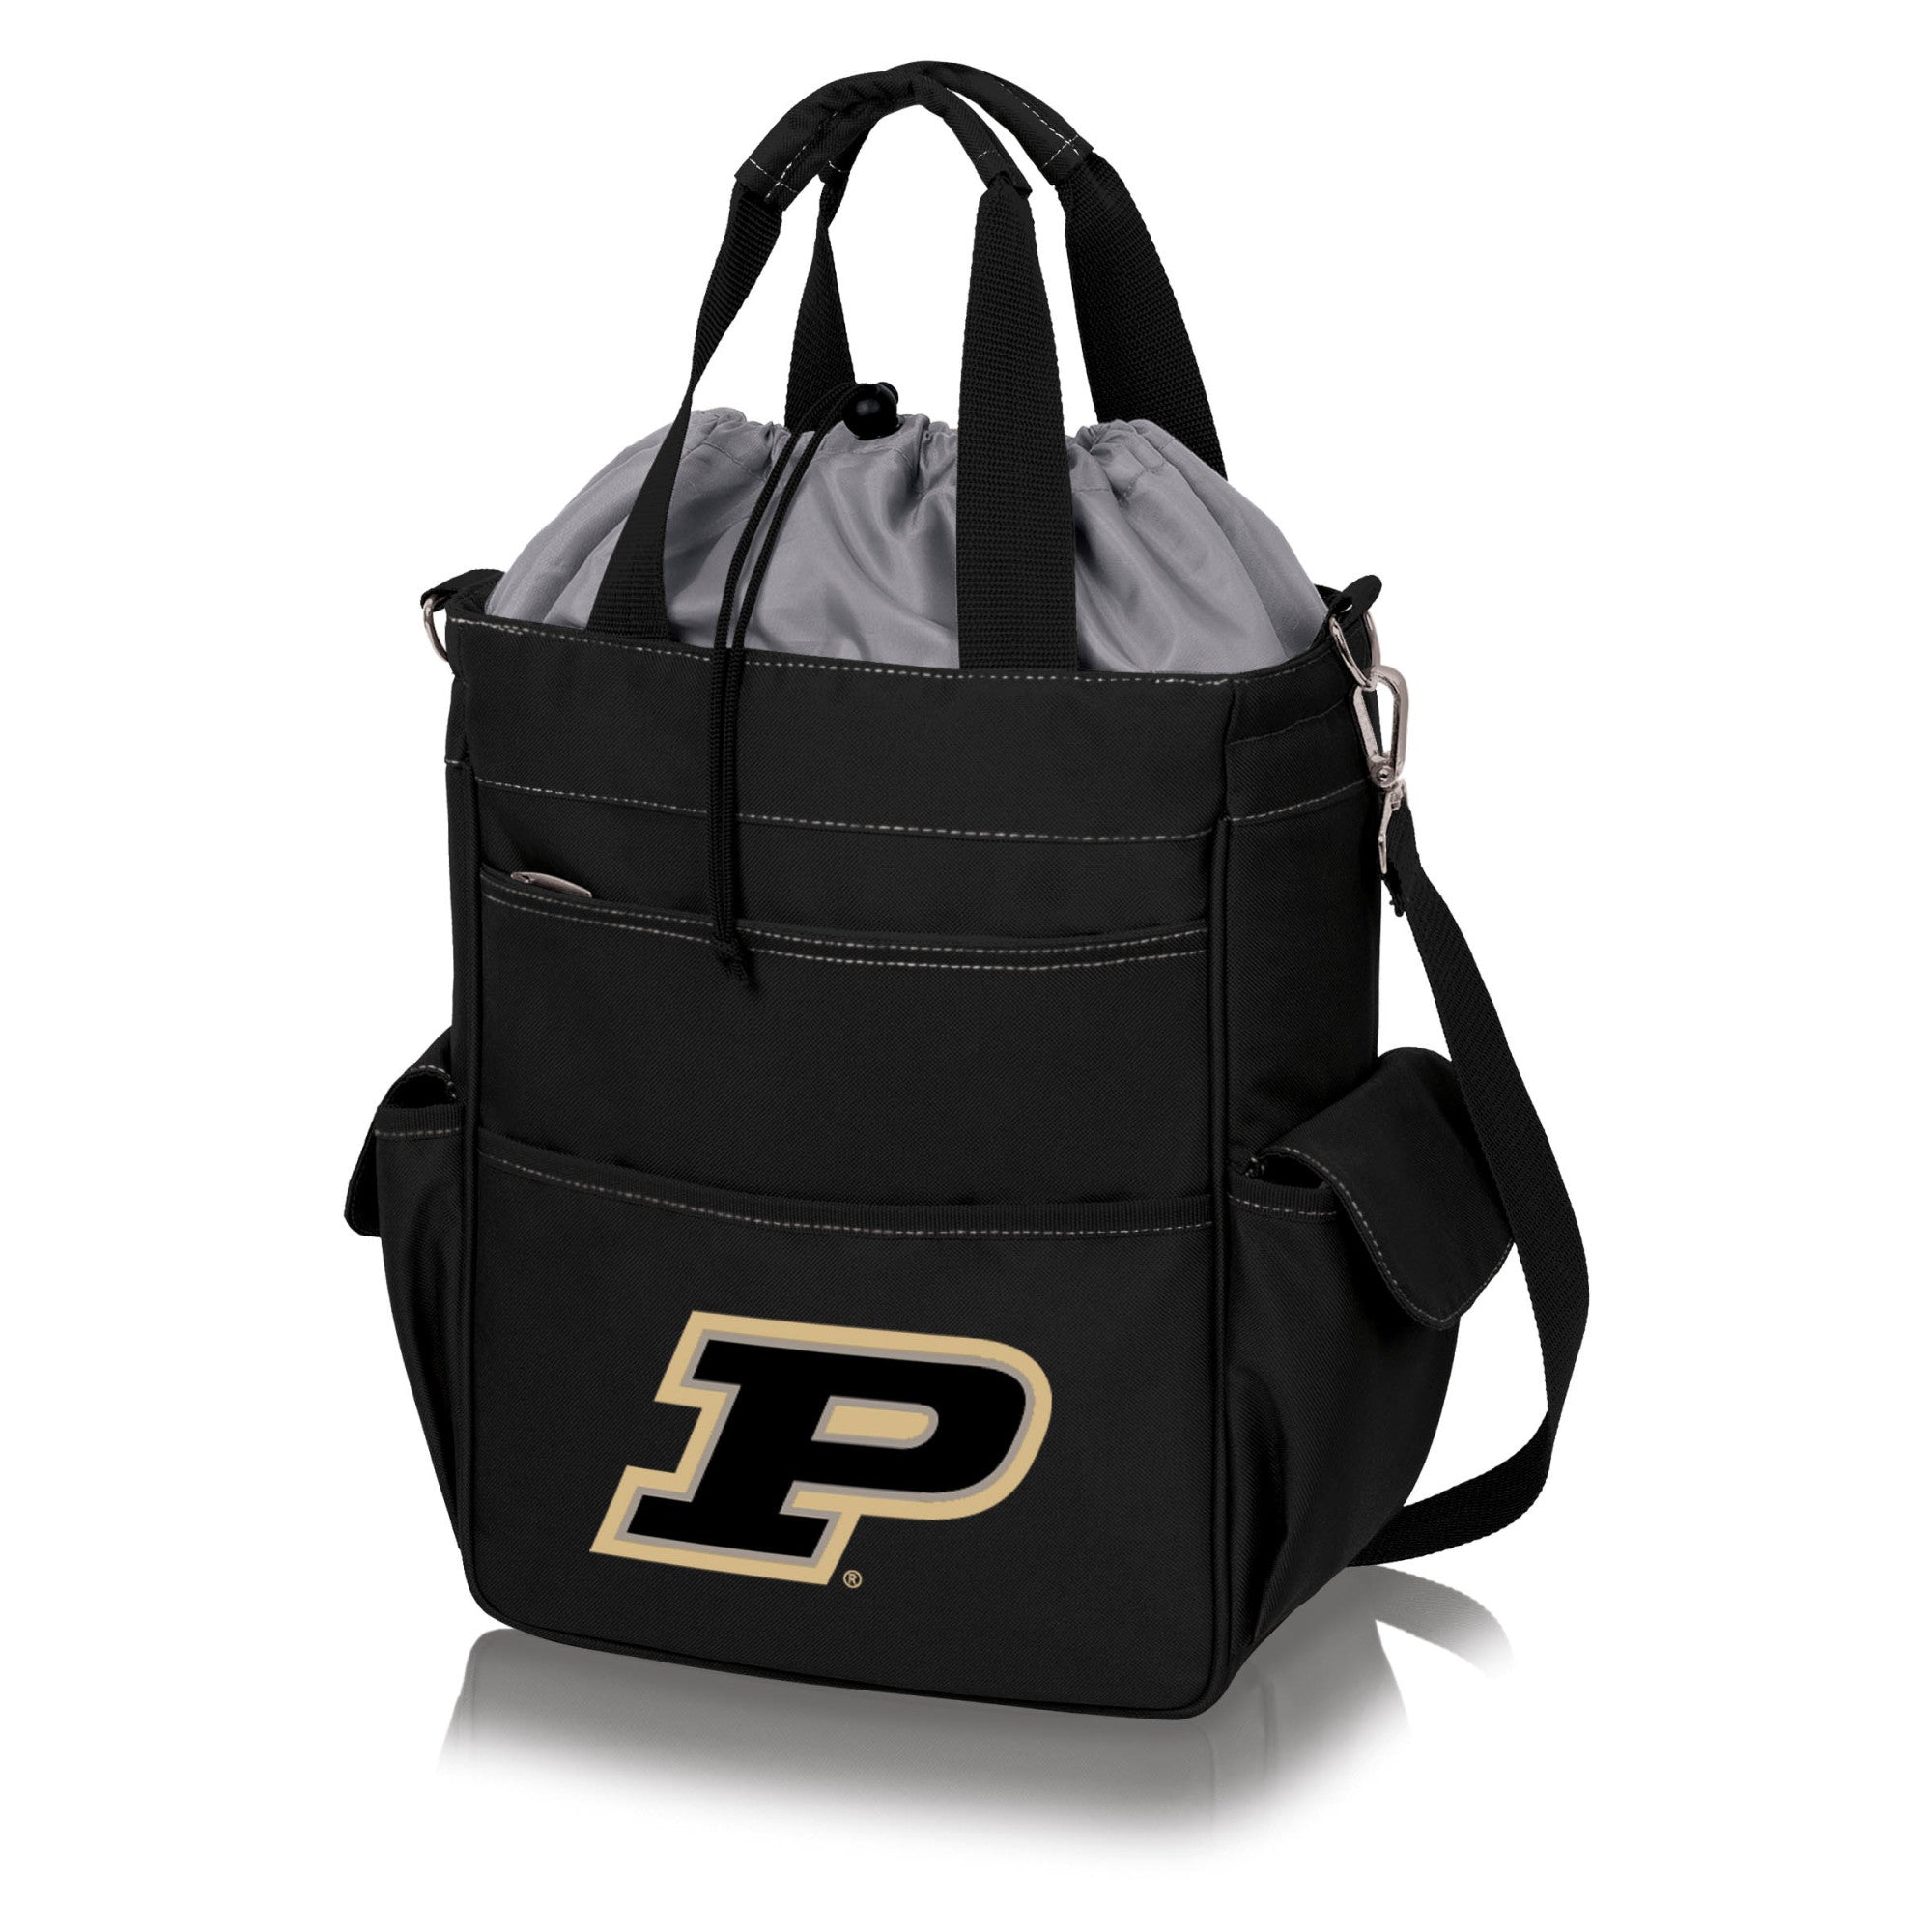 Purdue Boilermakers - Activo Cooler Tote Bag, (Black with Gray Accents)